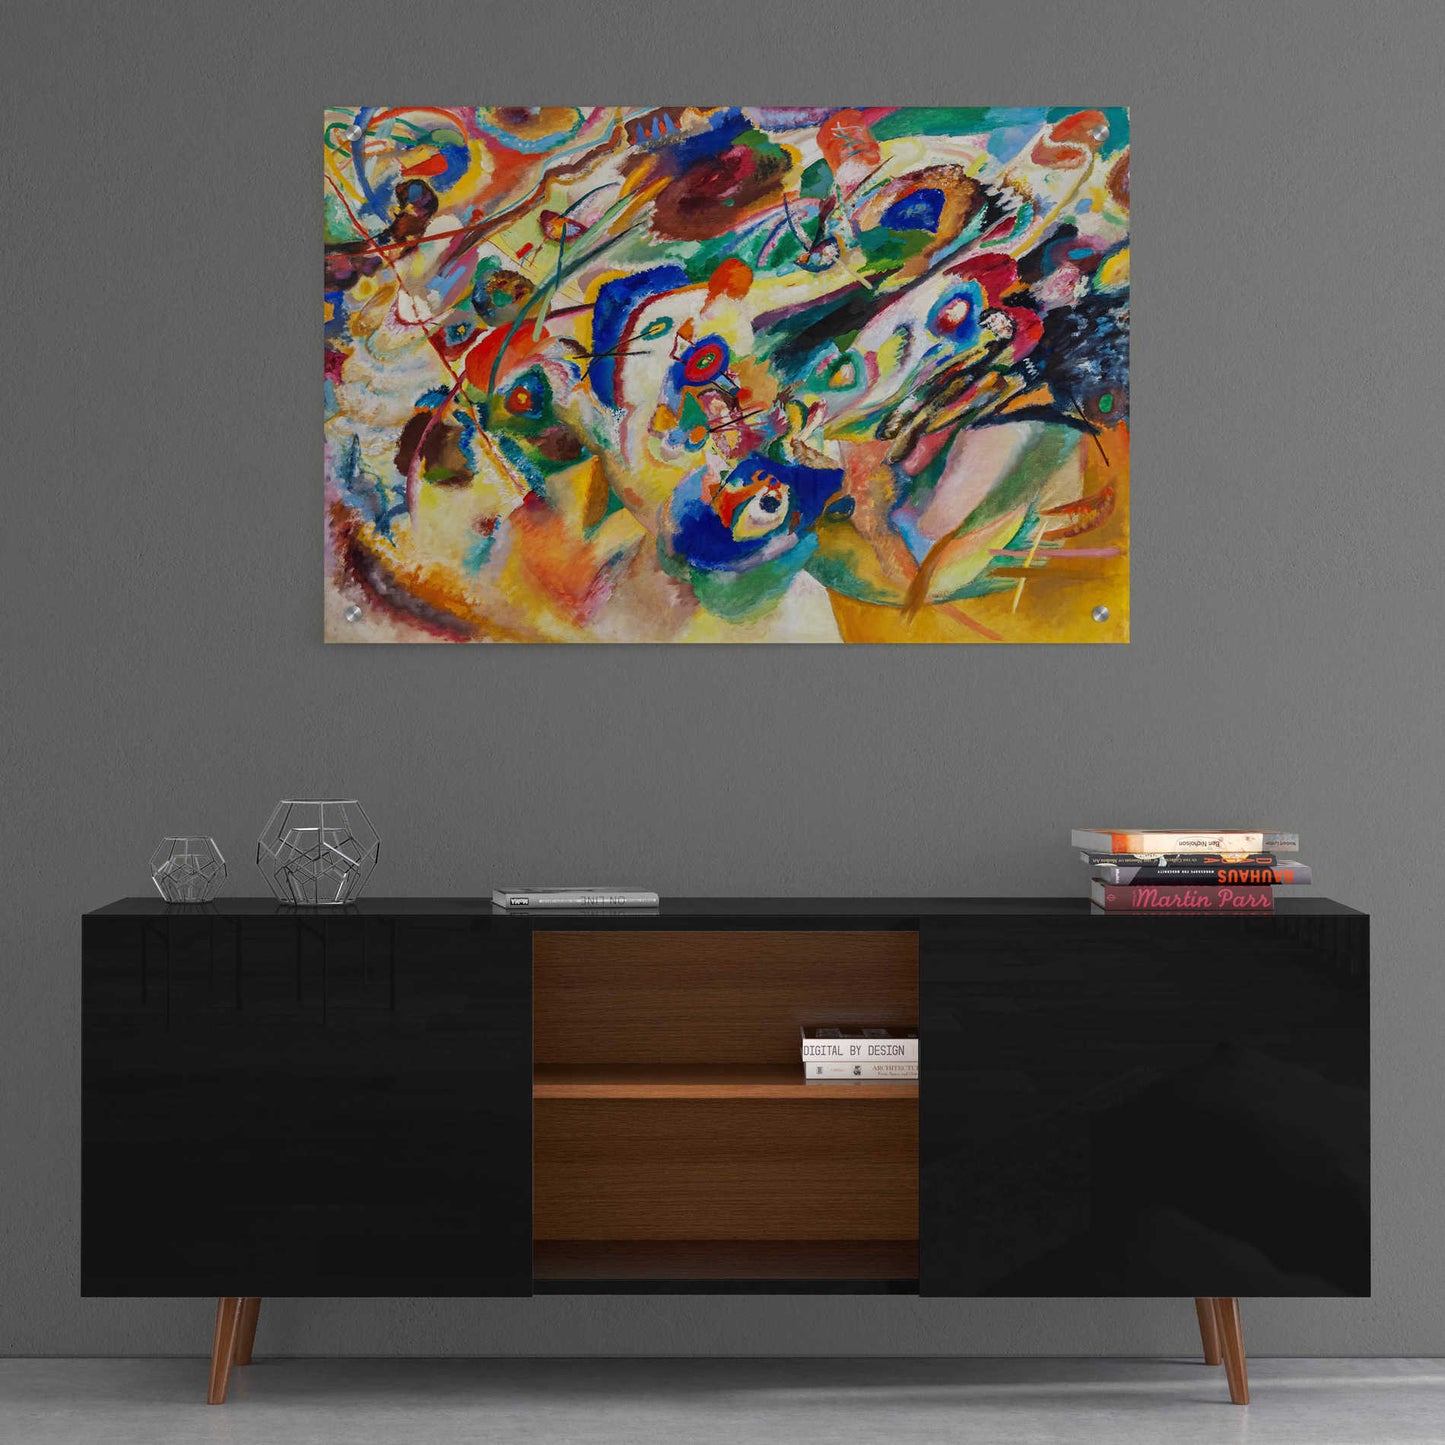 Epic Art 'Sketch 2 for Composition VII' by Wassily Kandinsky, Acrylic Glass Wall Art,36x24